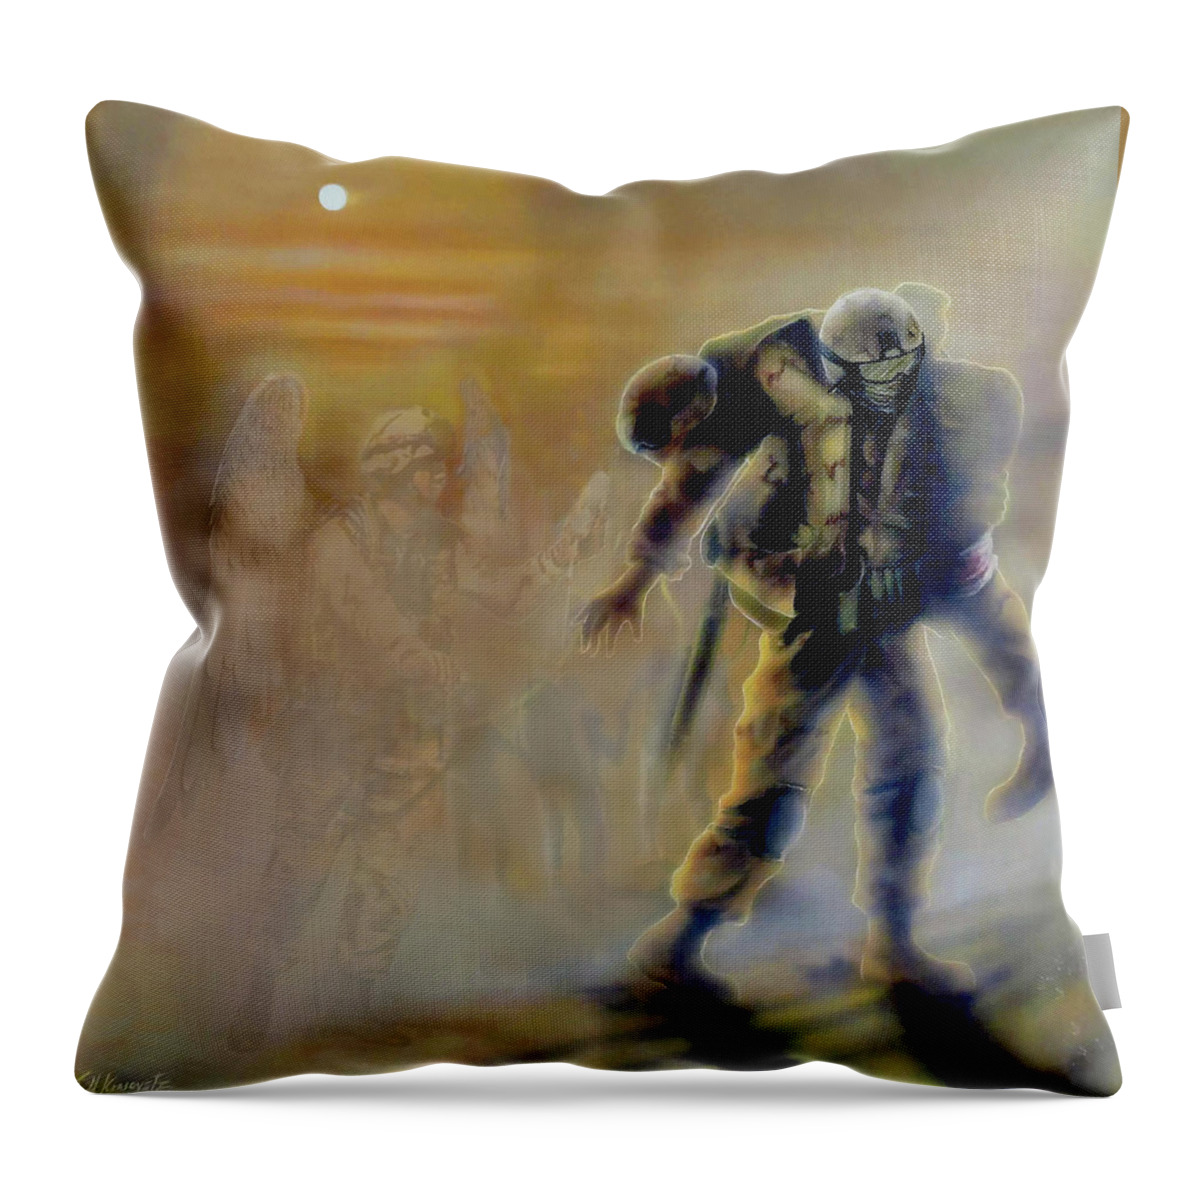 911 Throw Pillow featuring the painting Savior in a Storm #2 by Todd Krasovetz